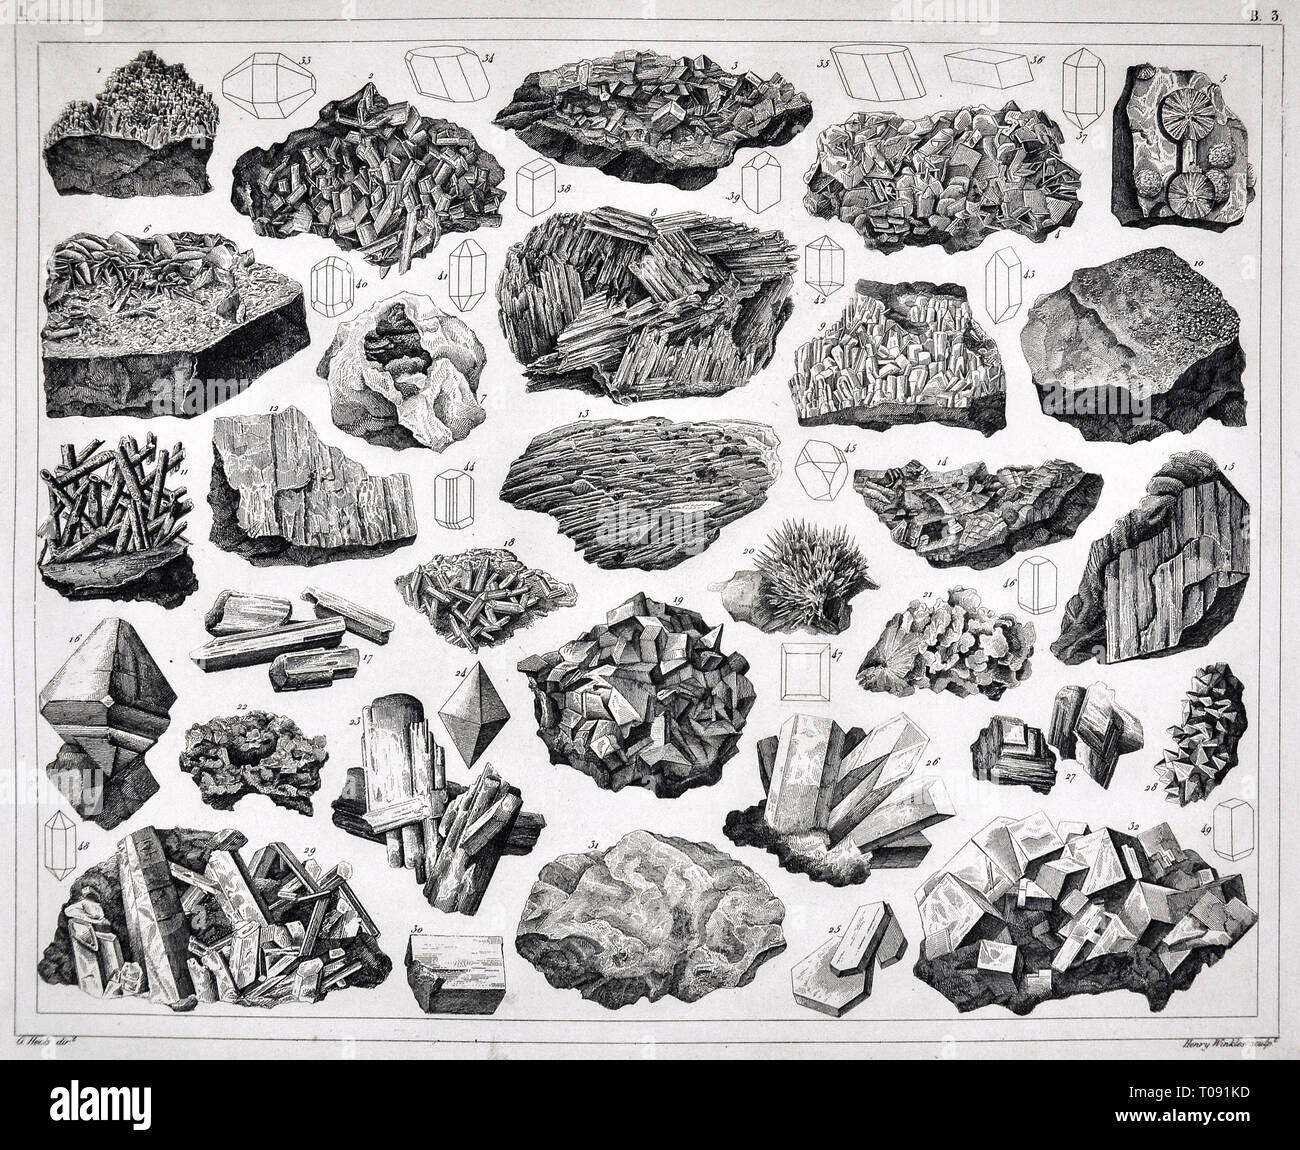 1849 Bilder Geological Print of Rocks and Minerals showing various Crystal Formations Stock Photo